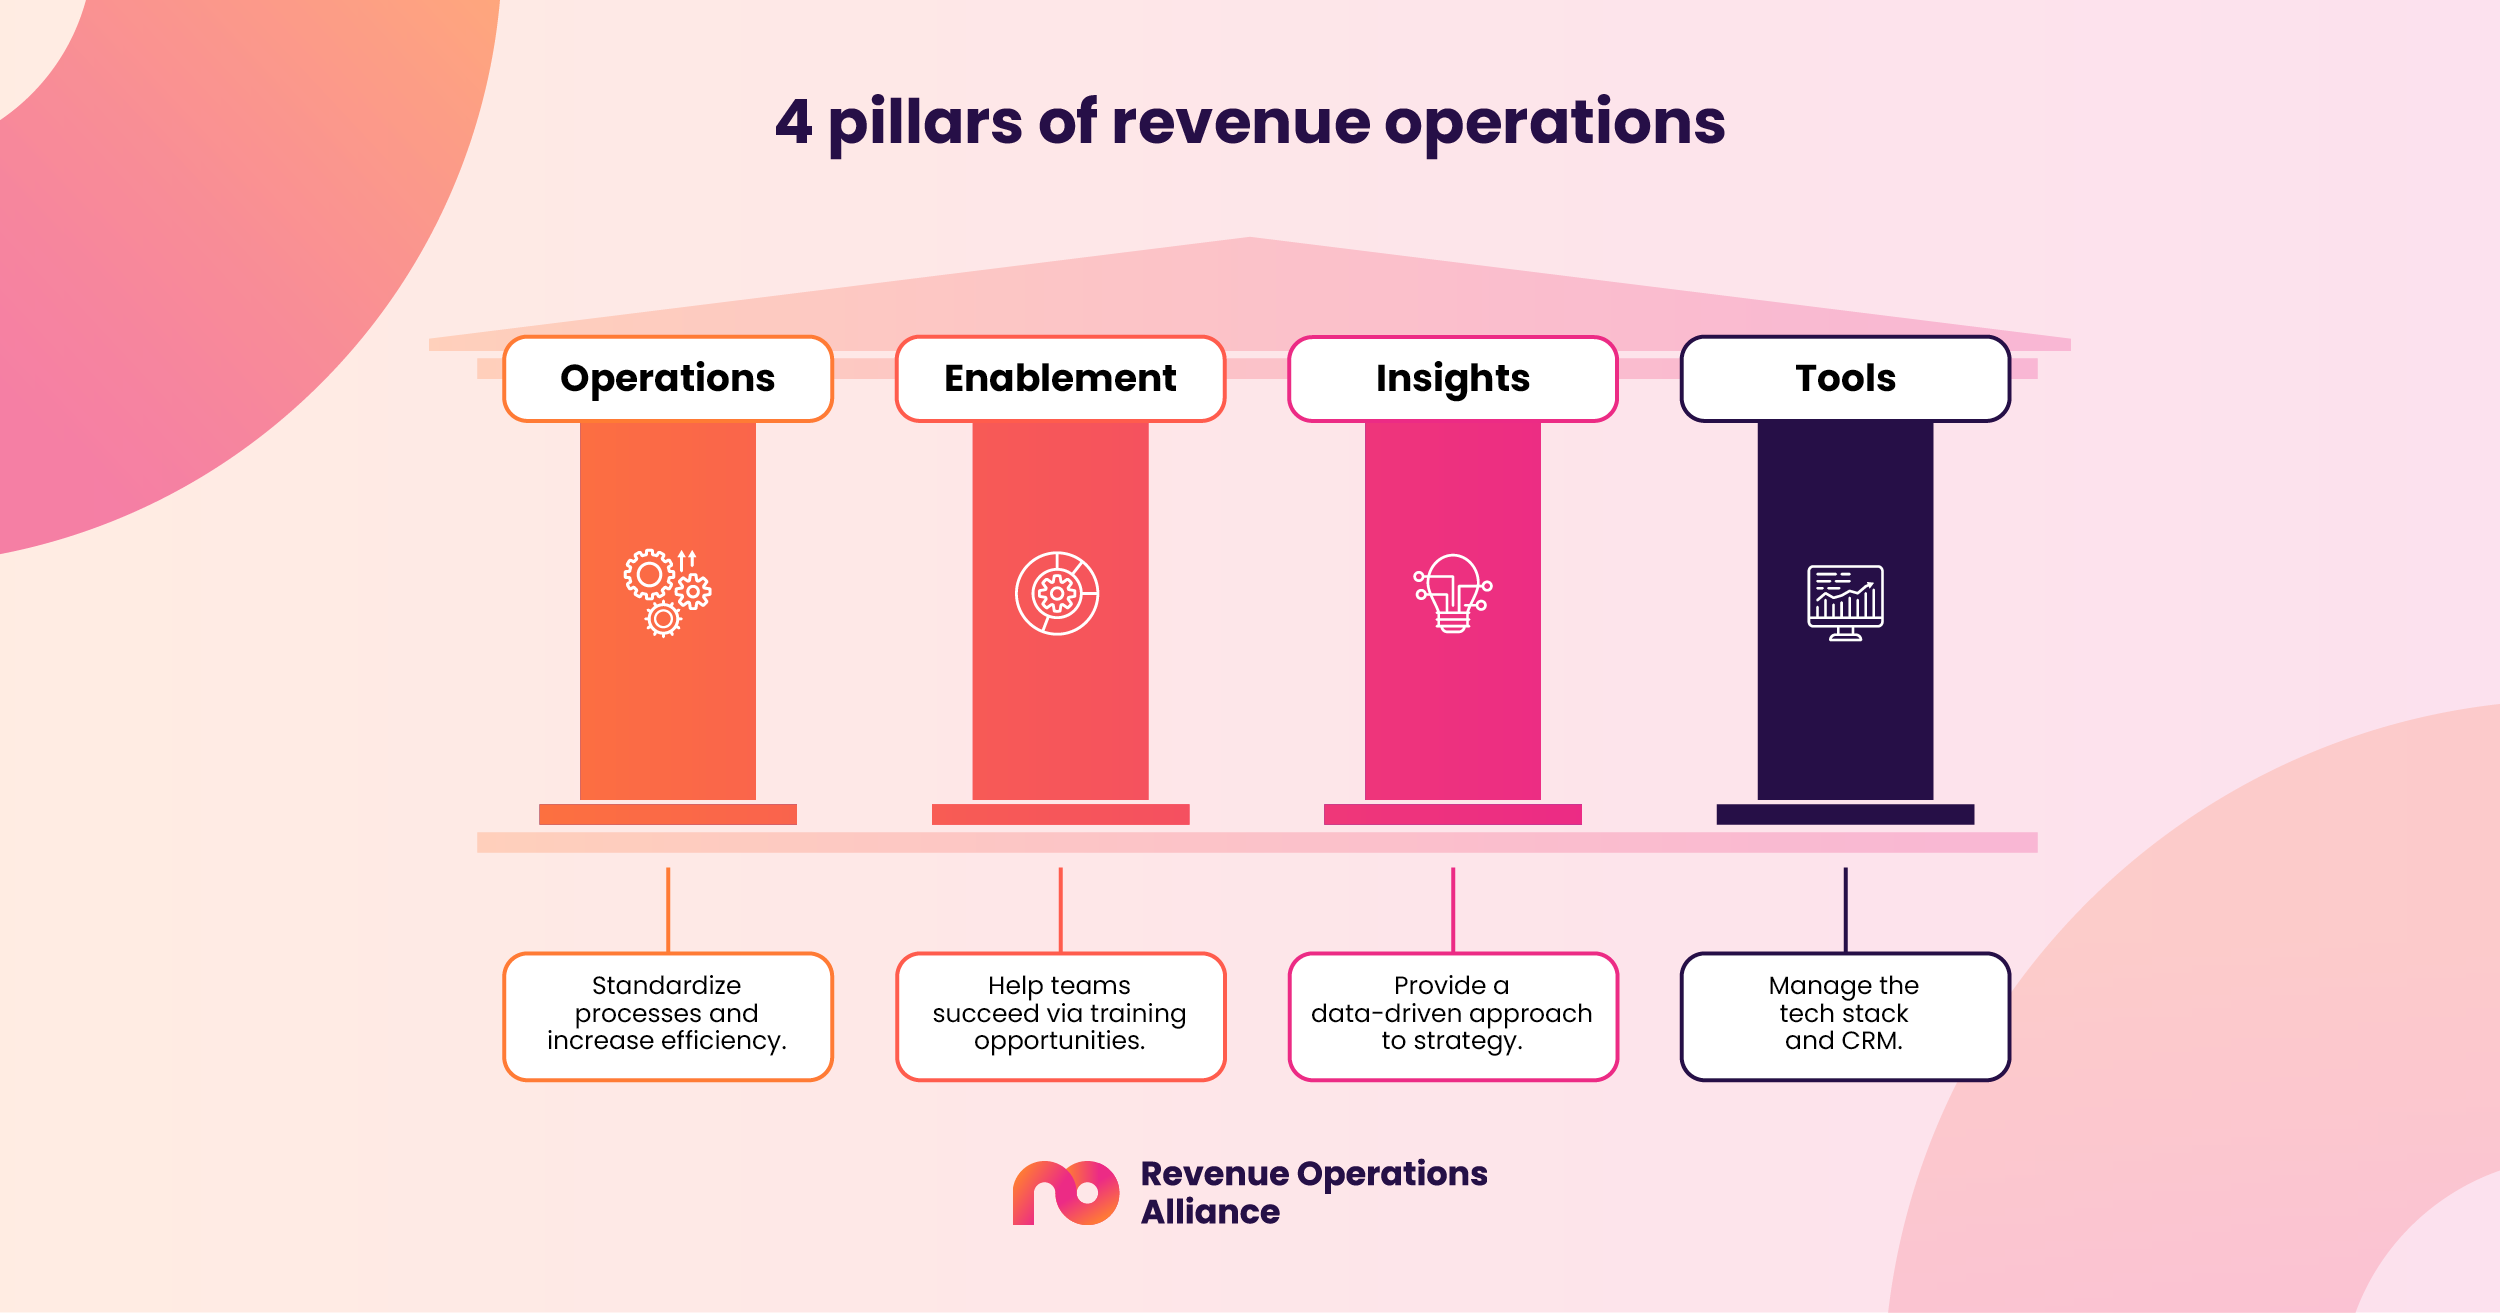 4 pillars of revenue operations: Operations - Standardize processes and increase efficiency.  Enablement - Help teams succeed via training opportunities.  Insights - Provide a data-driven approach to strategy.  Tools - Manage the tech stack and CRM. 